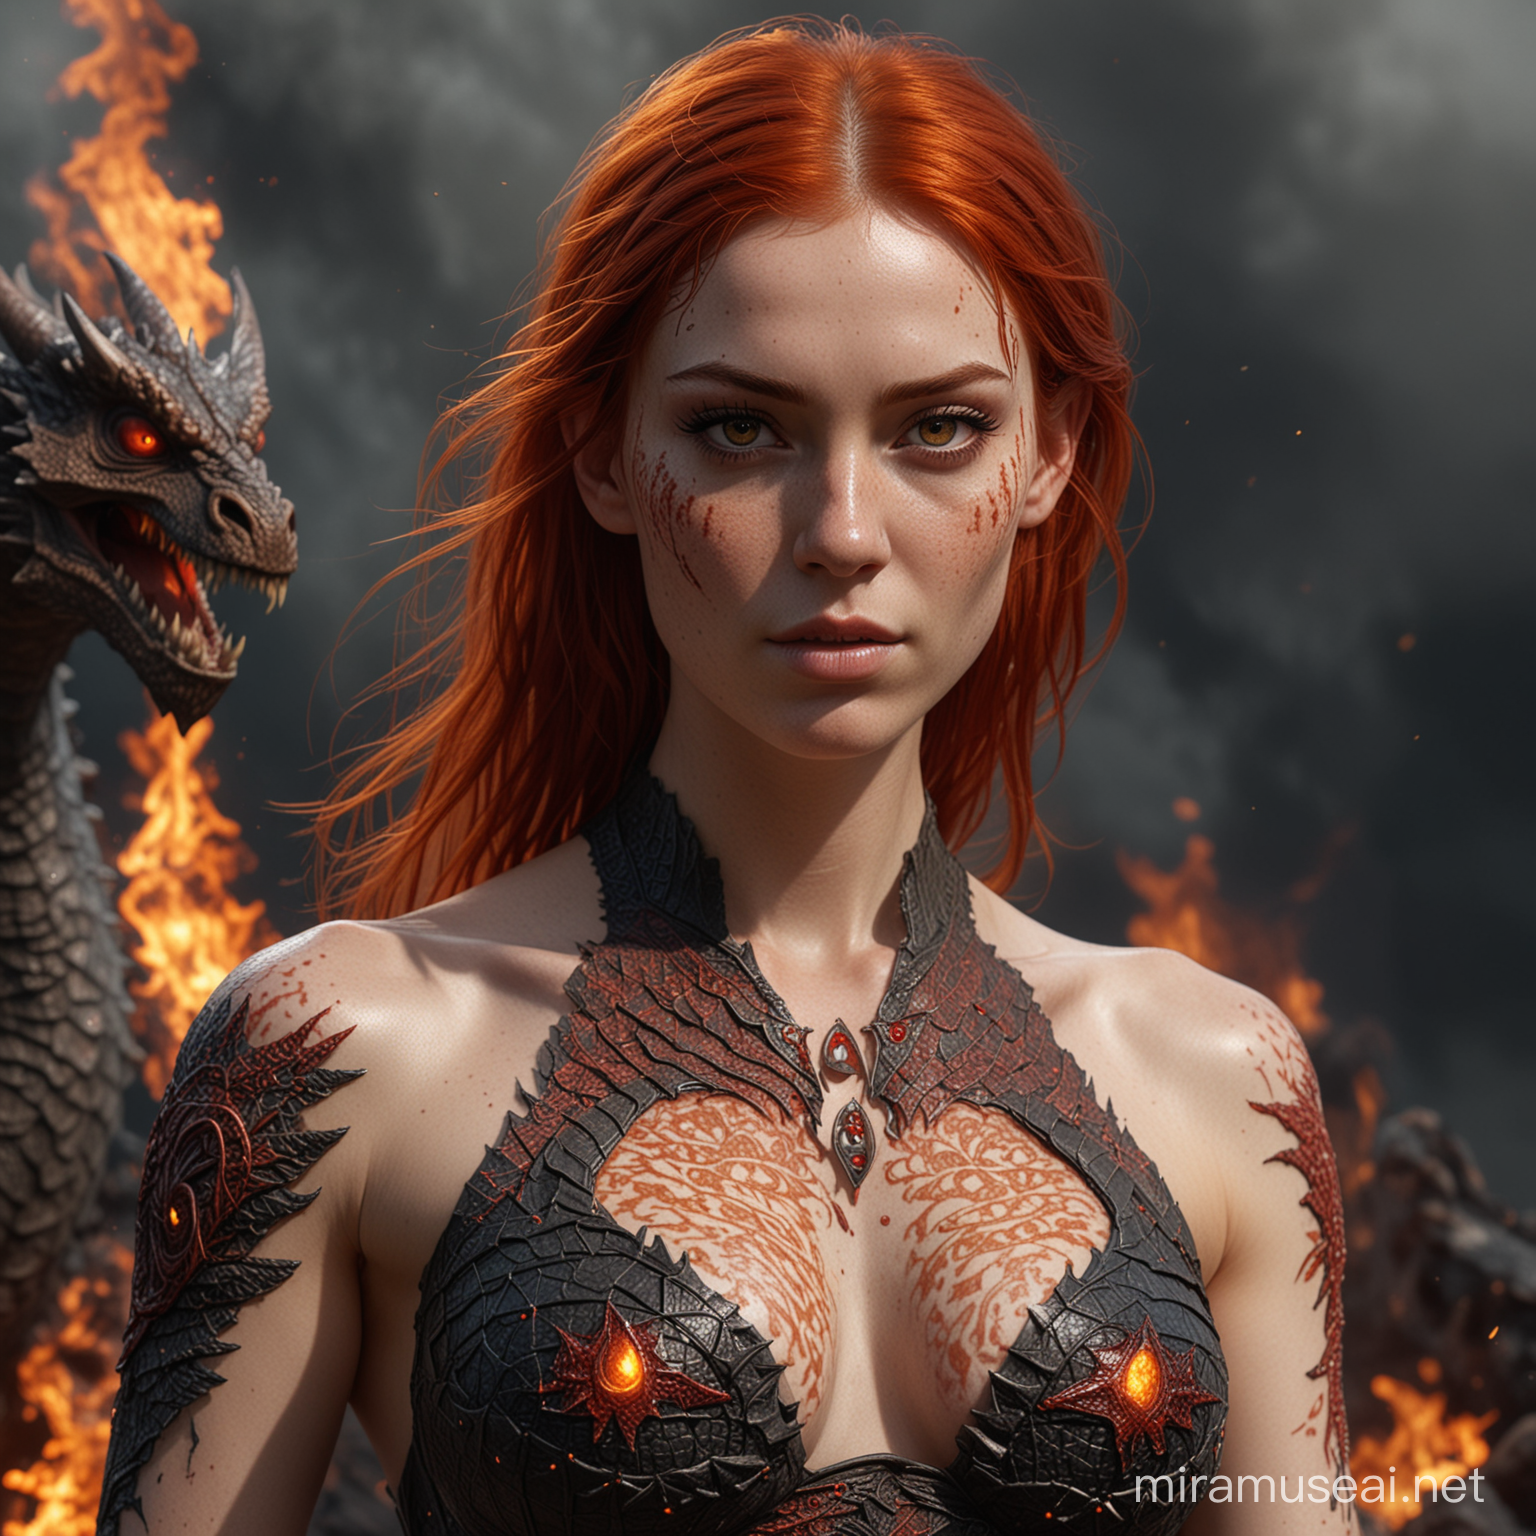 hyperrealistic very high detail 4k full body long shot photograph taken from the left with depth perception, showing a female human with long fiery red hair thin red eyebrows, burning red eyes and face full of freckles, with draconic symbols carved into arms and body, sleeveless open front top made of dragon scales